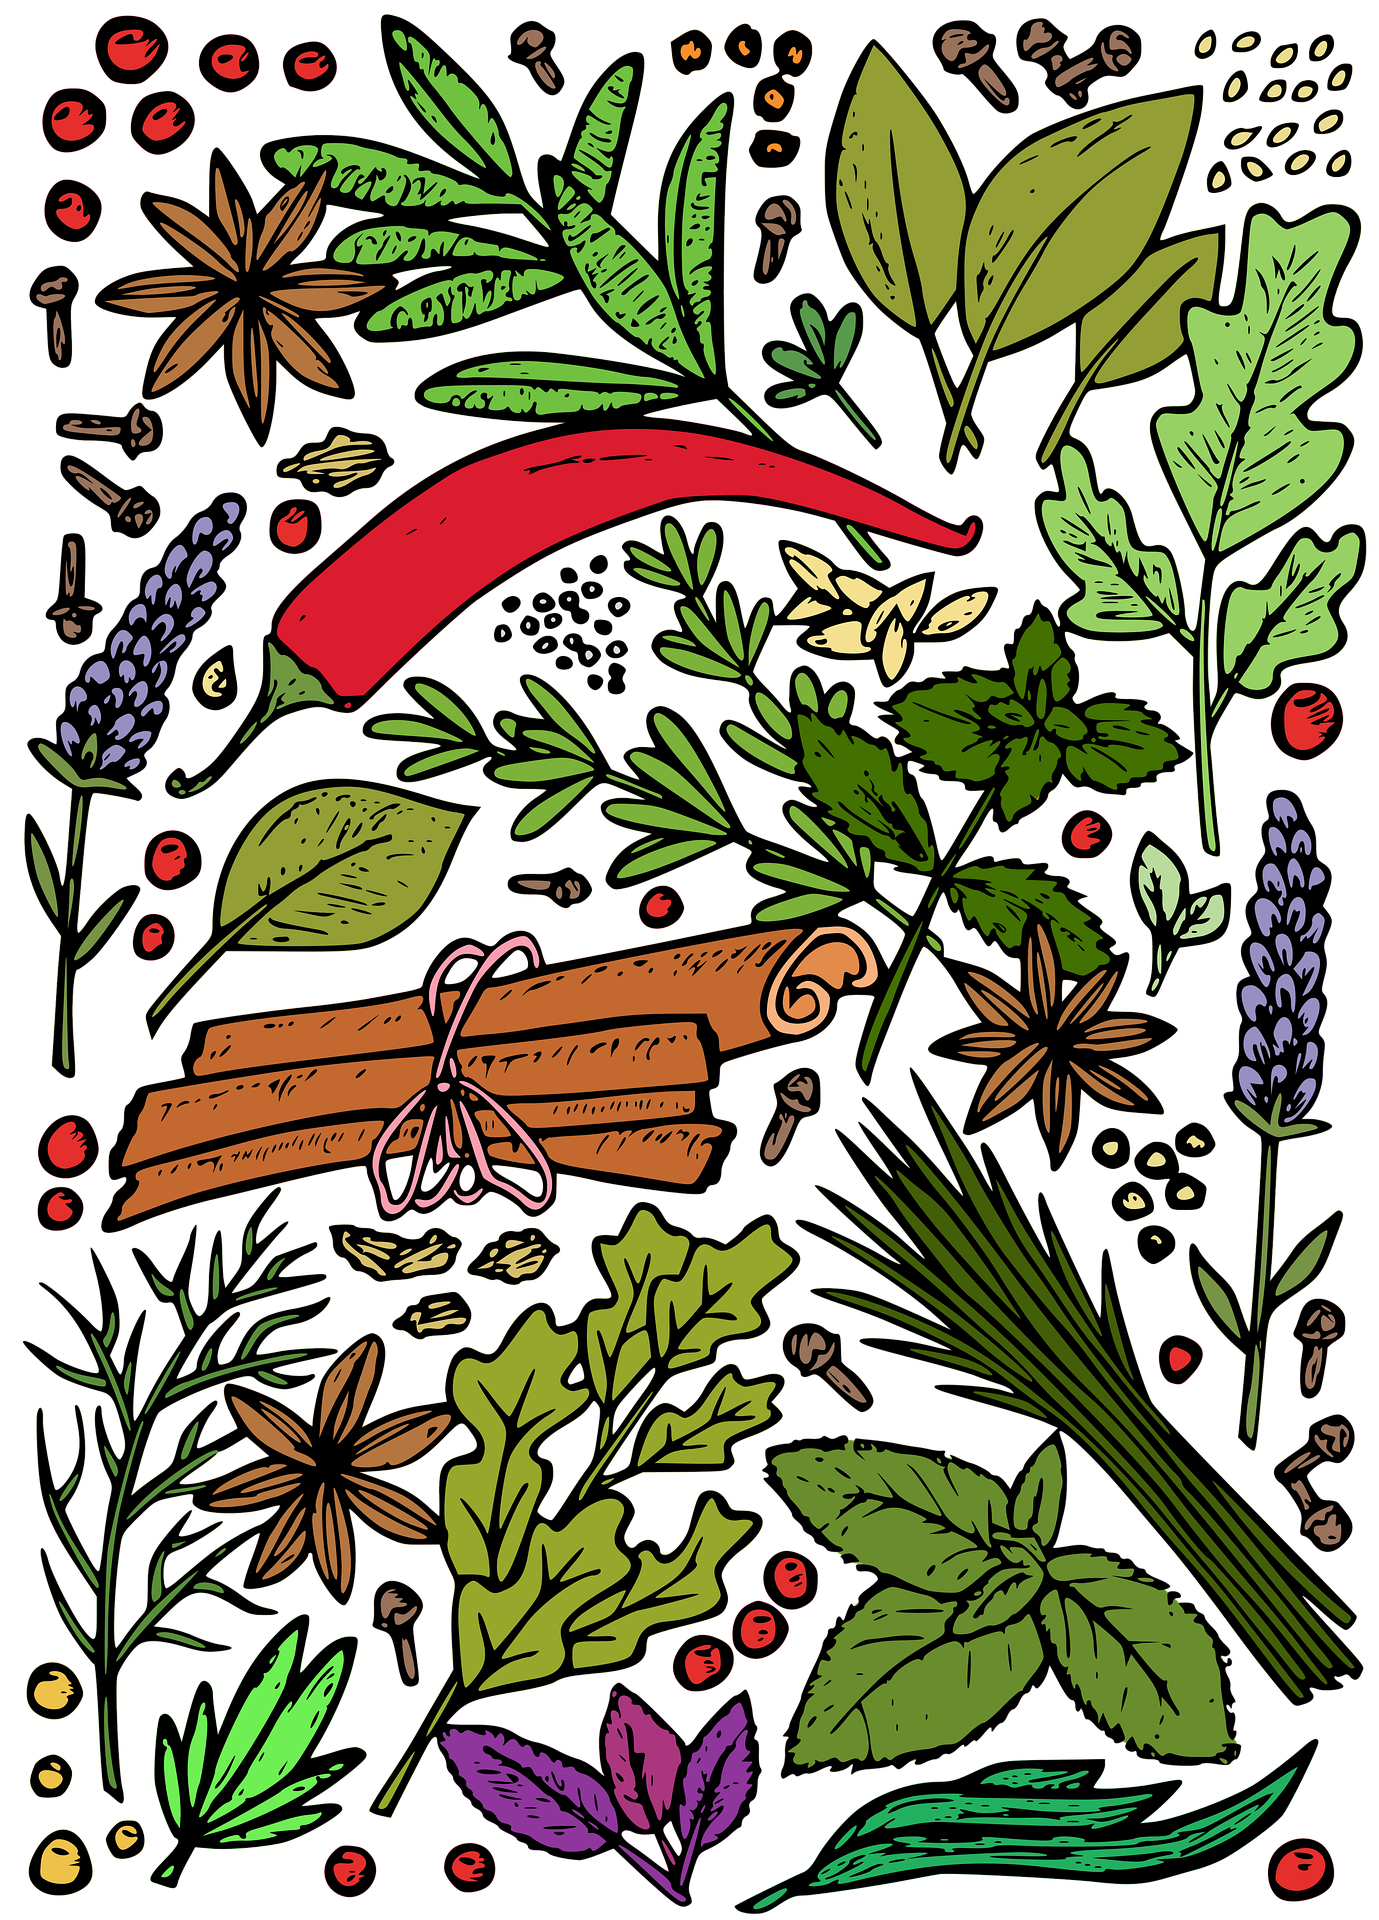 Drawing of herbs and spices including cinnamon, basil, parsley and lavender